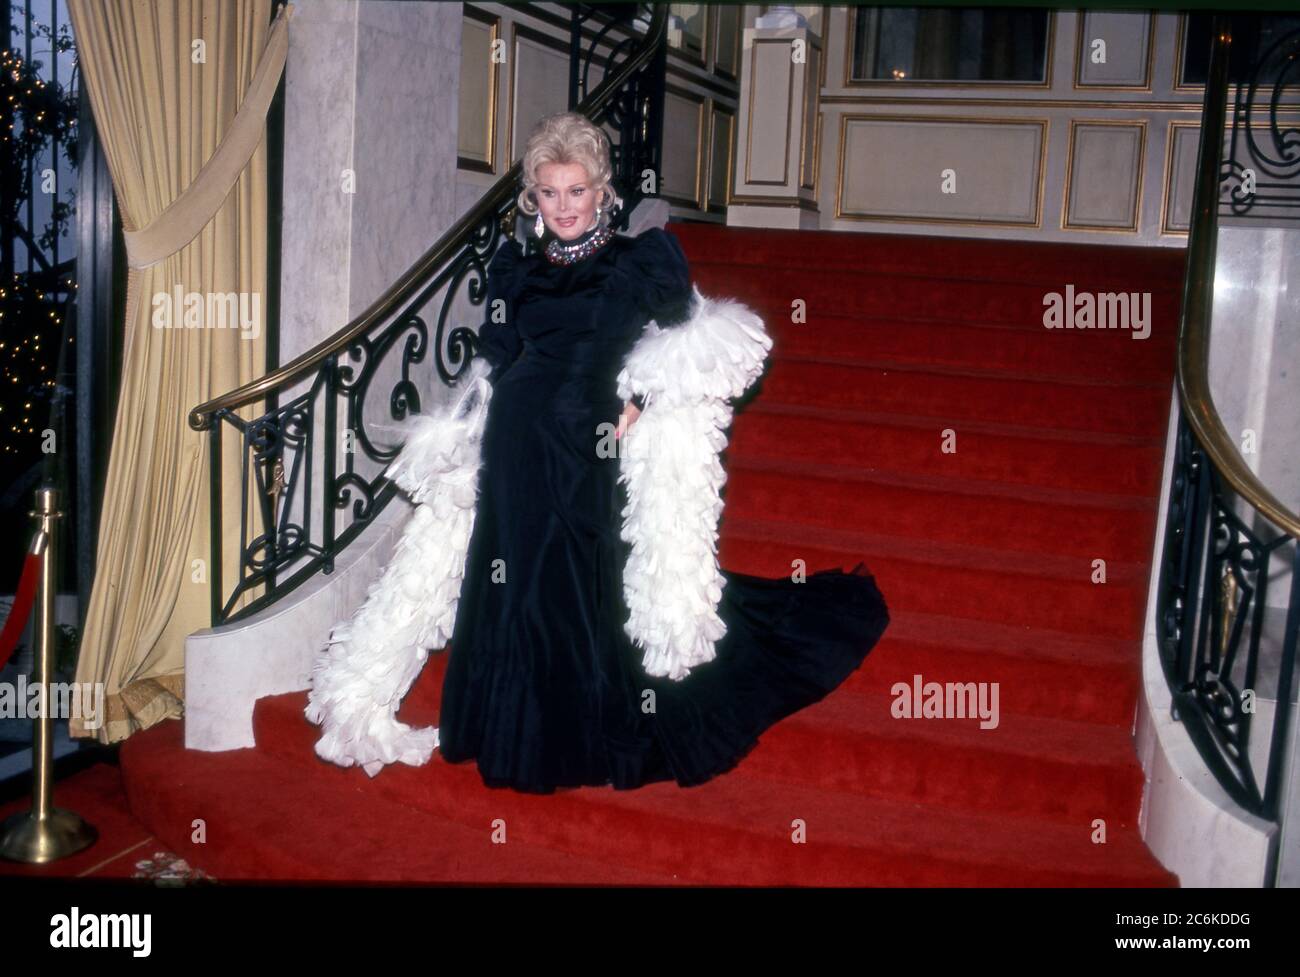 Actreee Zsa Zsa Gabor making a grand entrance at a gala the Beverly Hilton Hotel in Beverly Hills, CA circa 1970s. Stock Photo